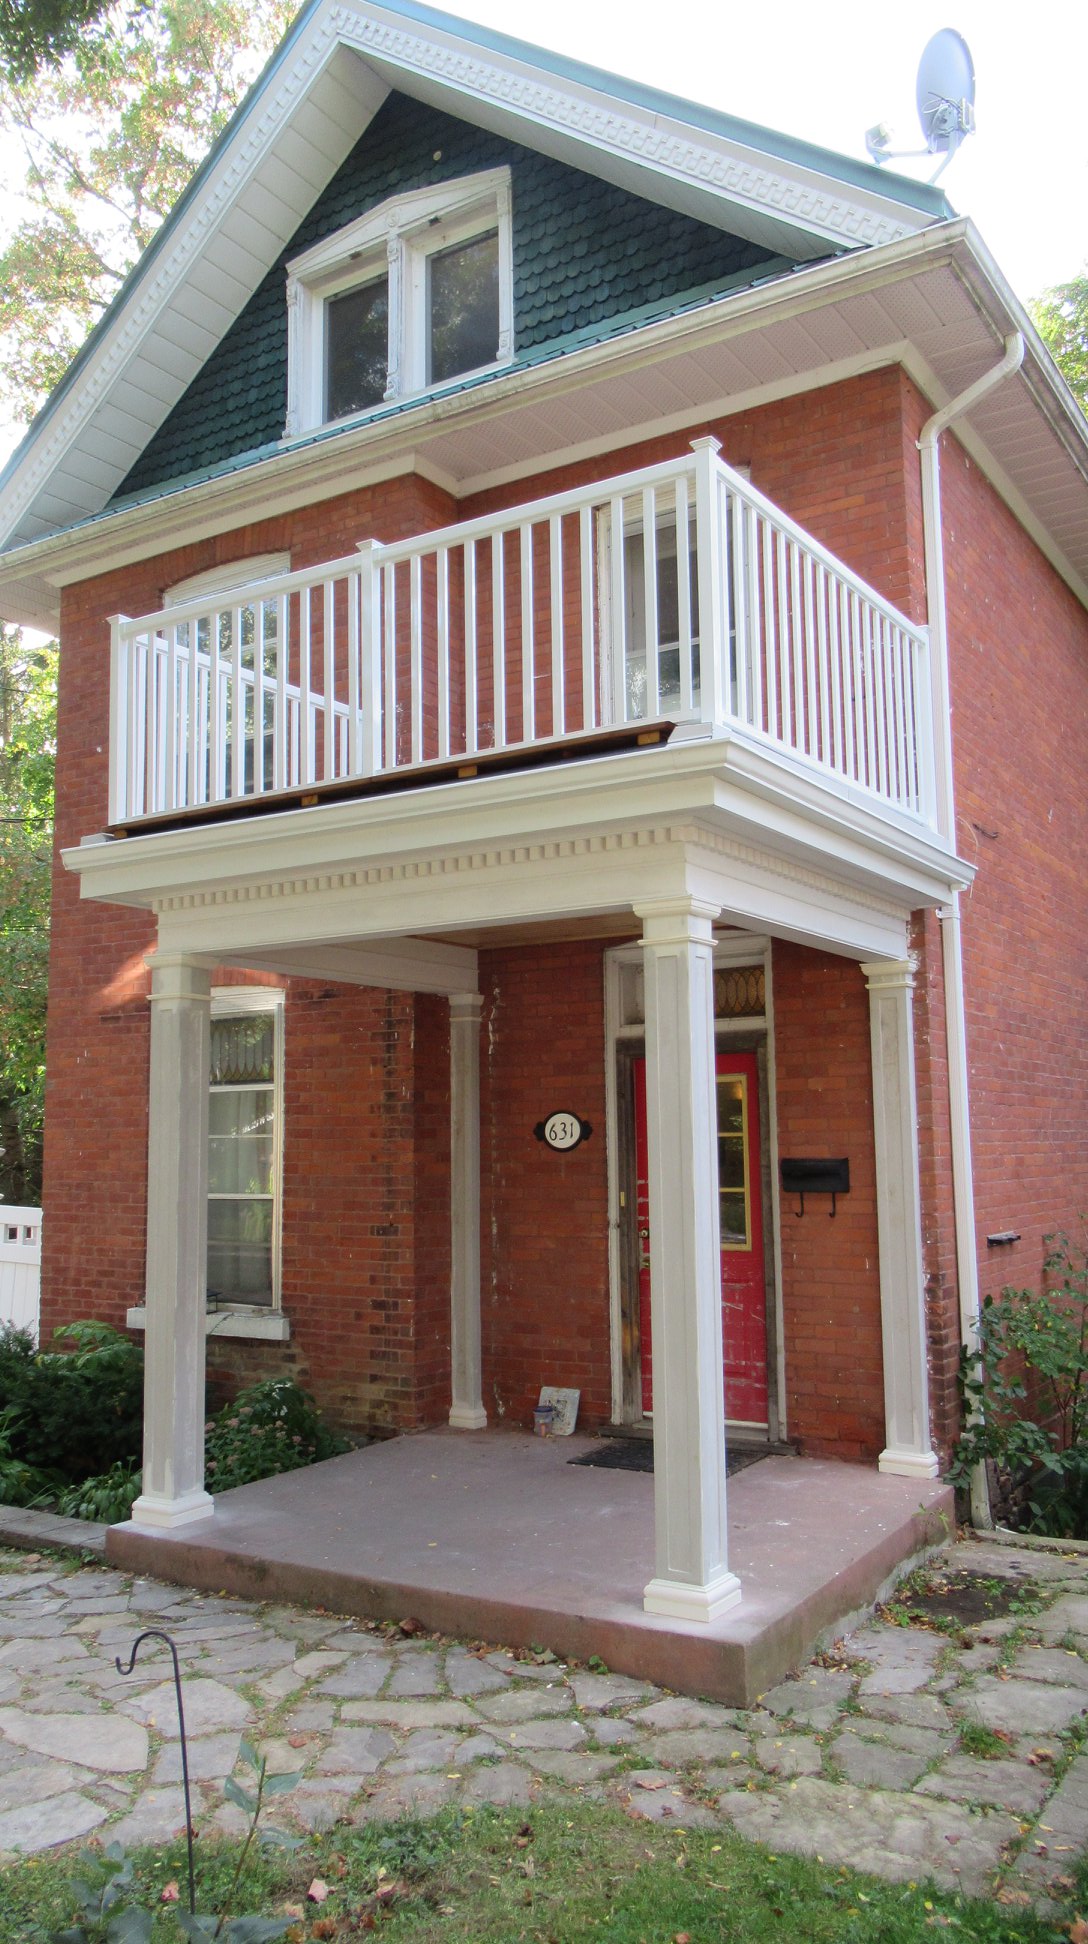 Front porch with columns and patio above